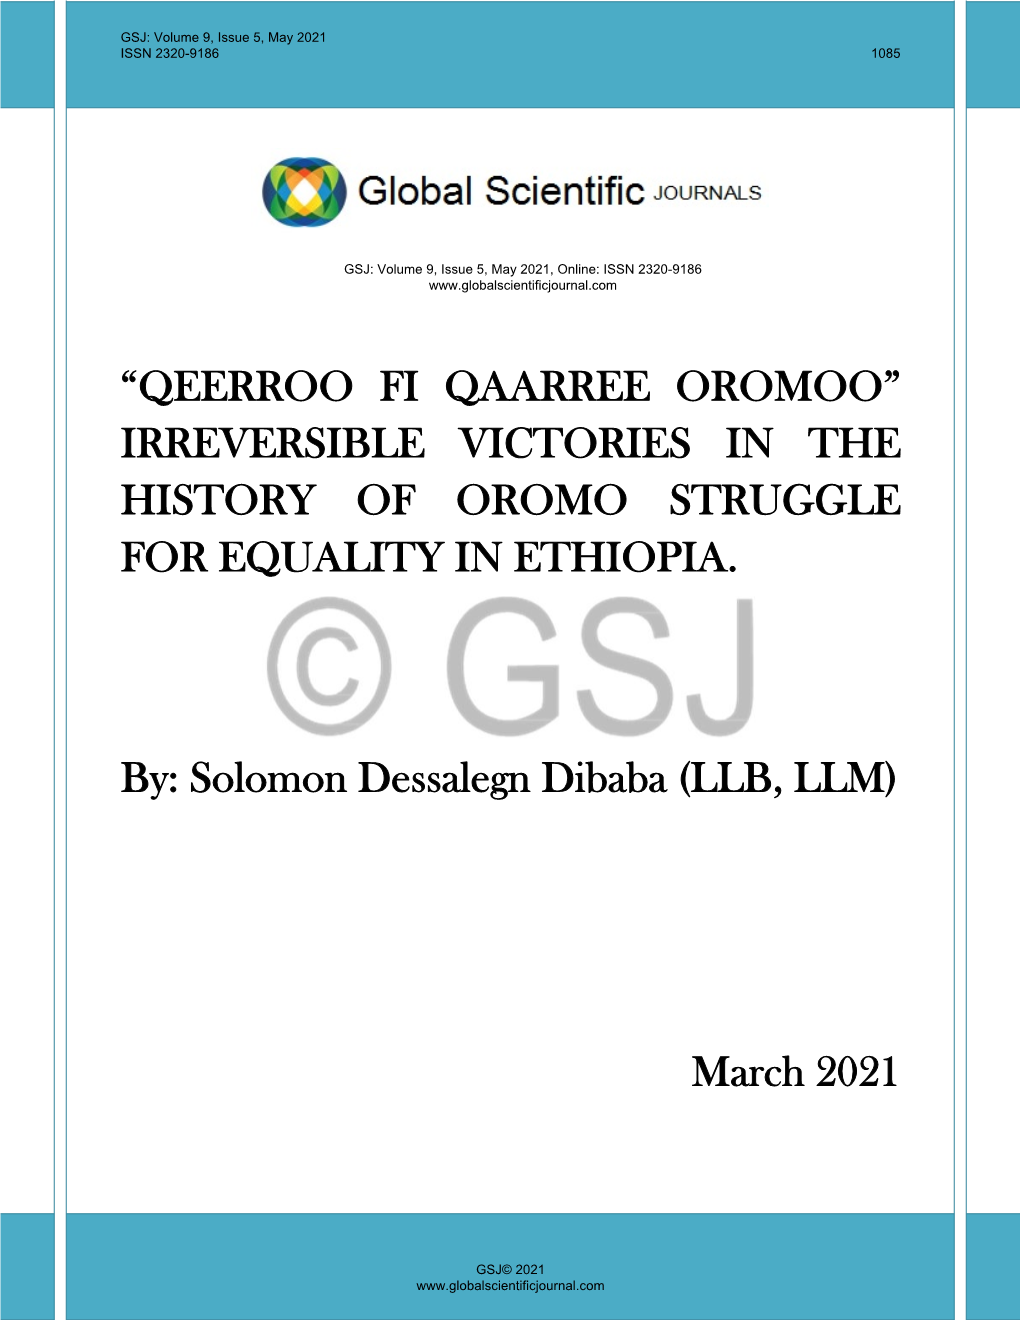 Qeerroo Fi Qaarree Oromoo” Irreversible Victories in the History of Oromo Struggle for Equality in Ethiopia